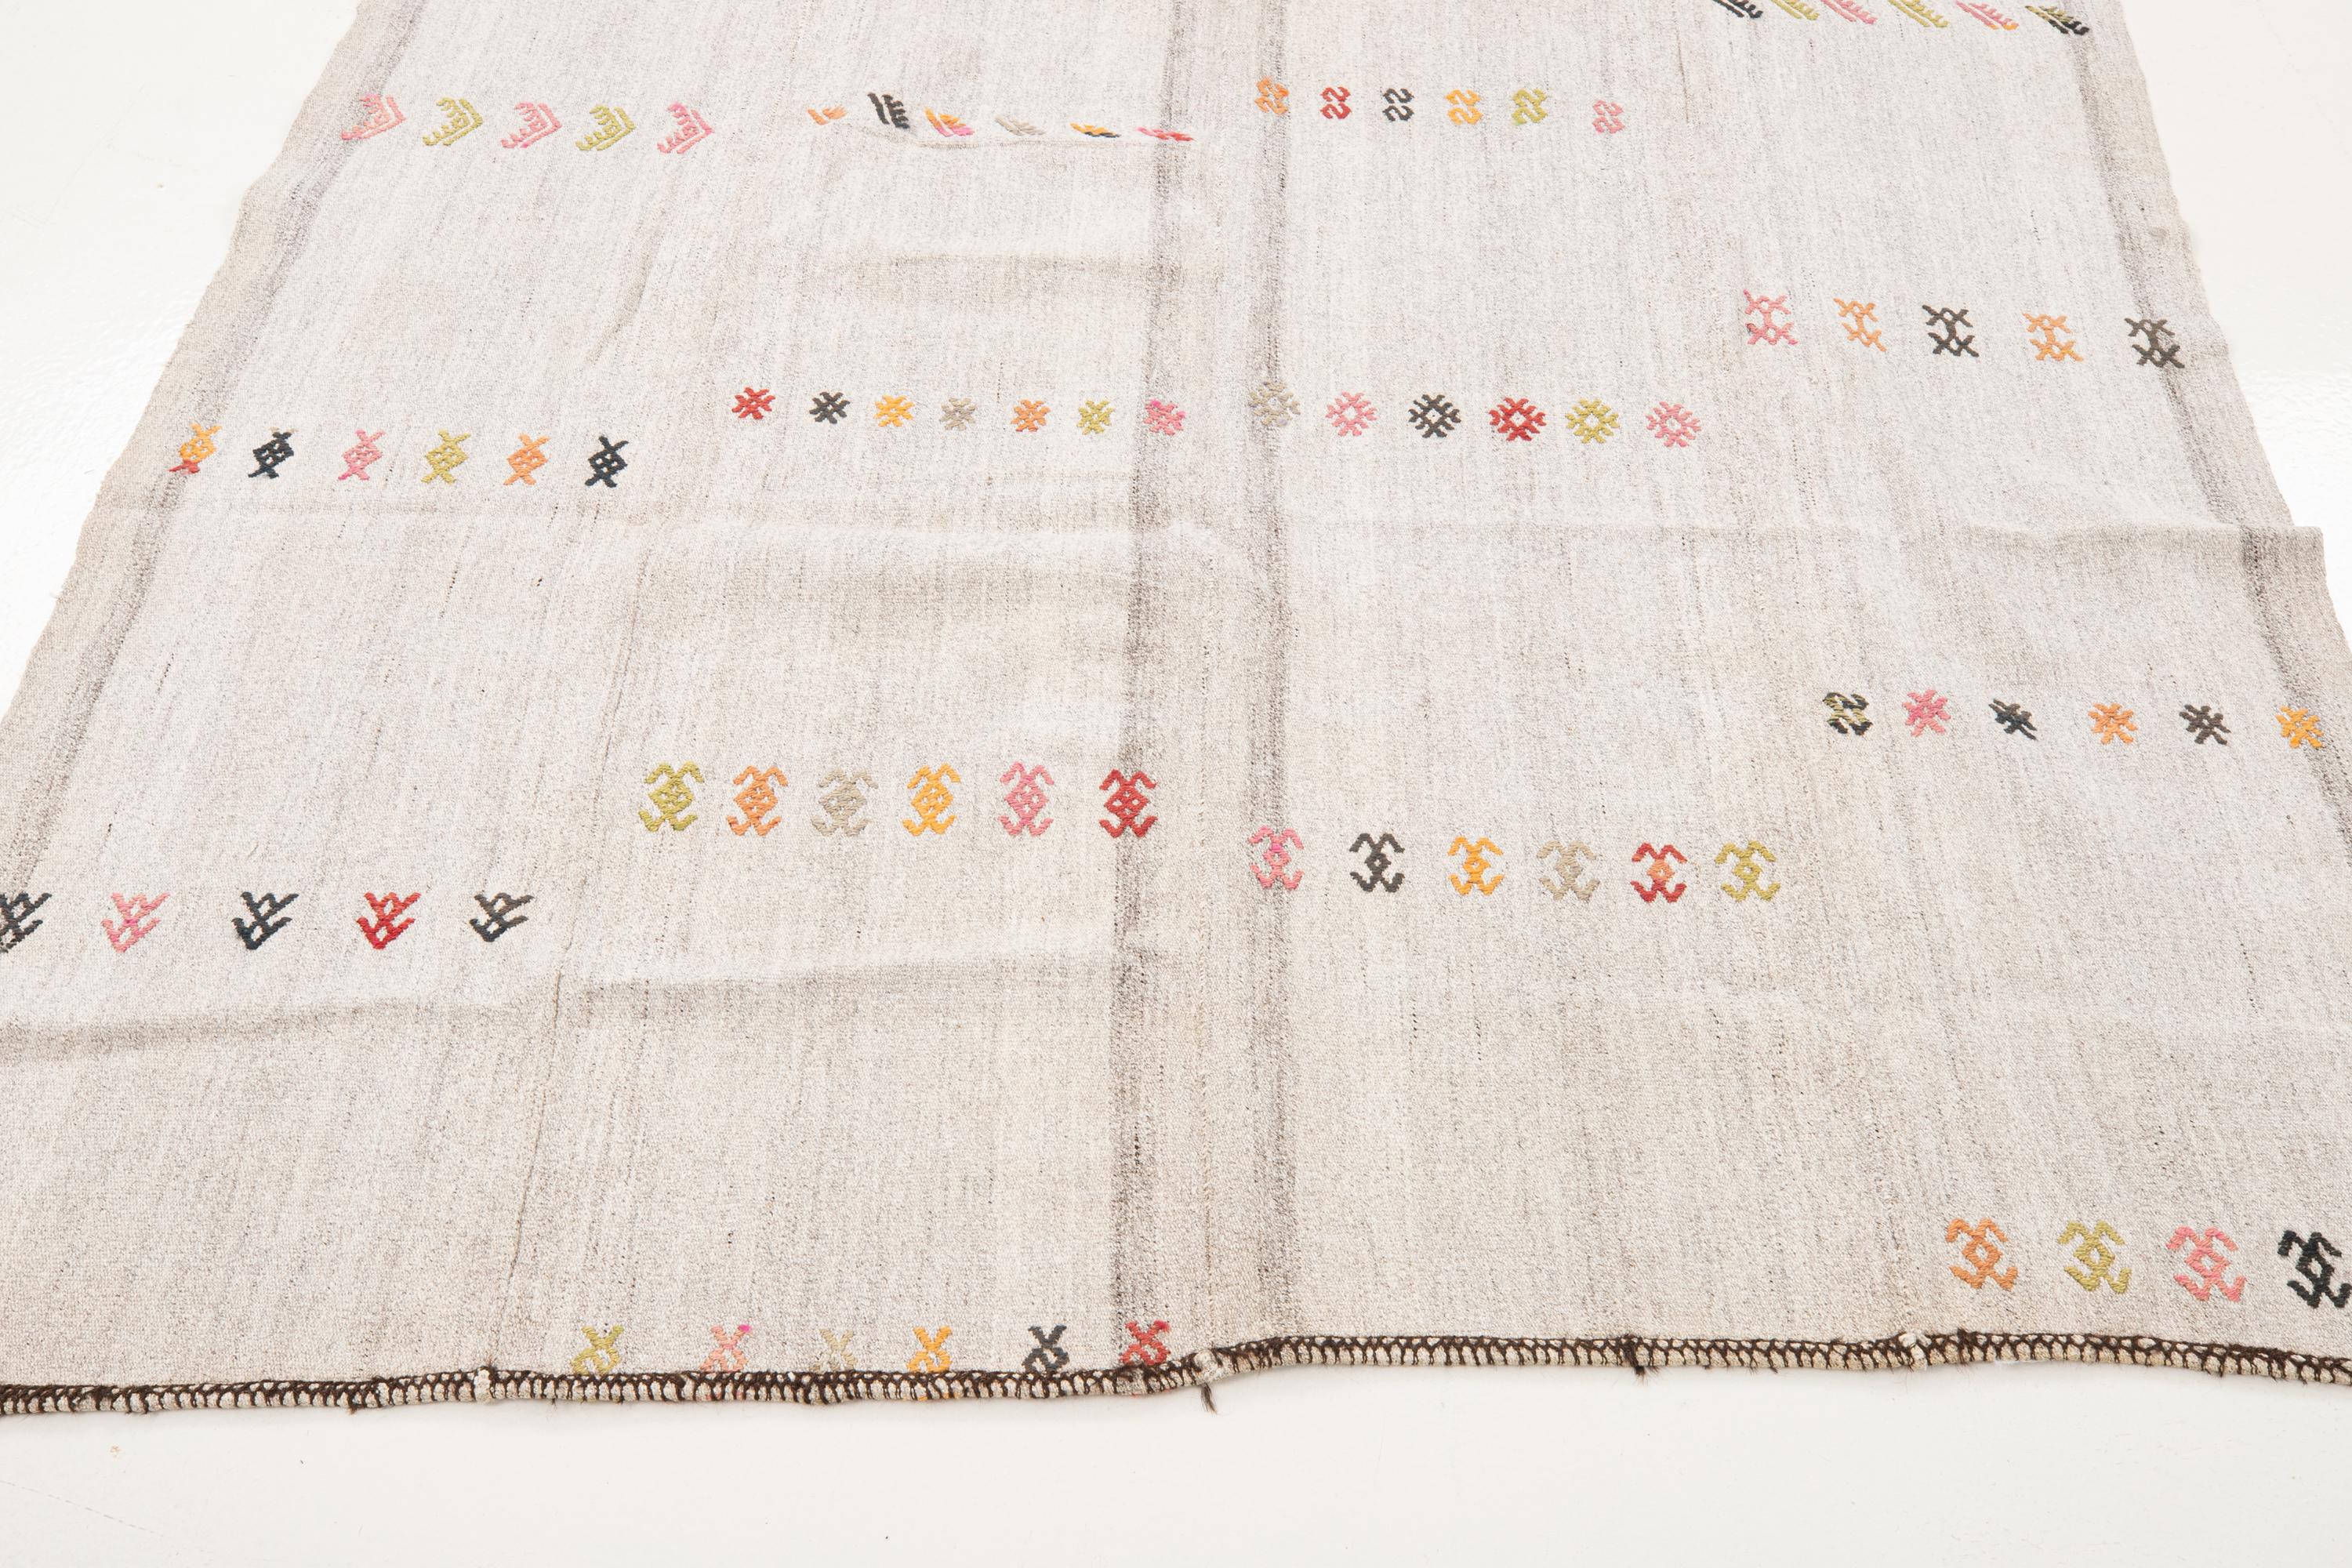 Finely woven rustic Anatolian cicim kilim in cotton and goat hair.